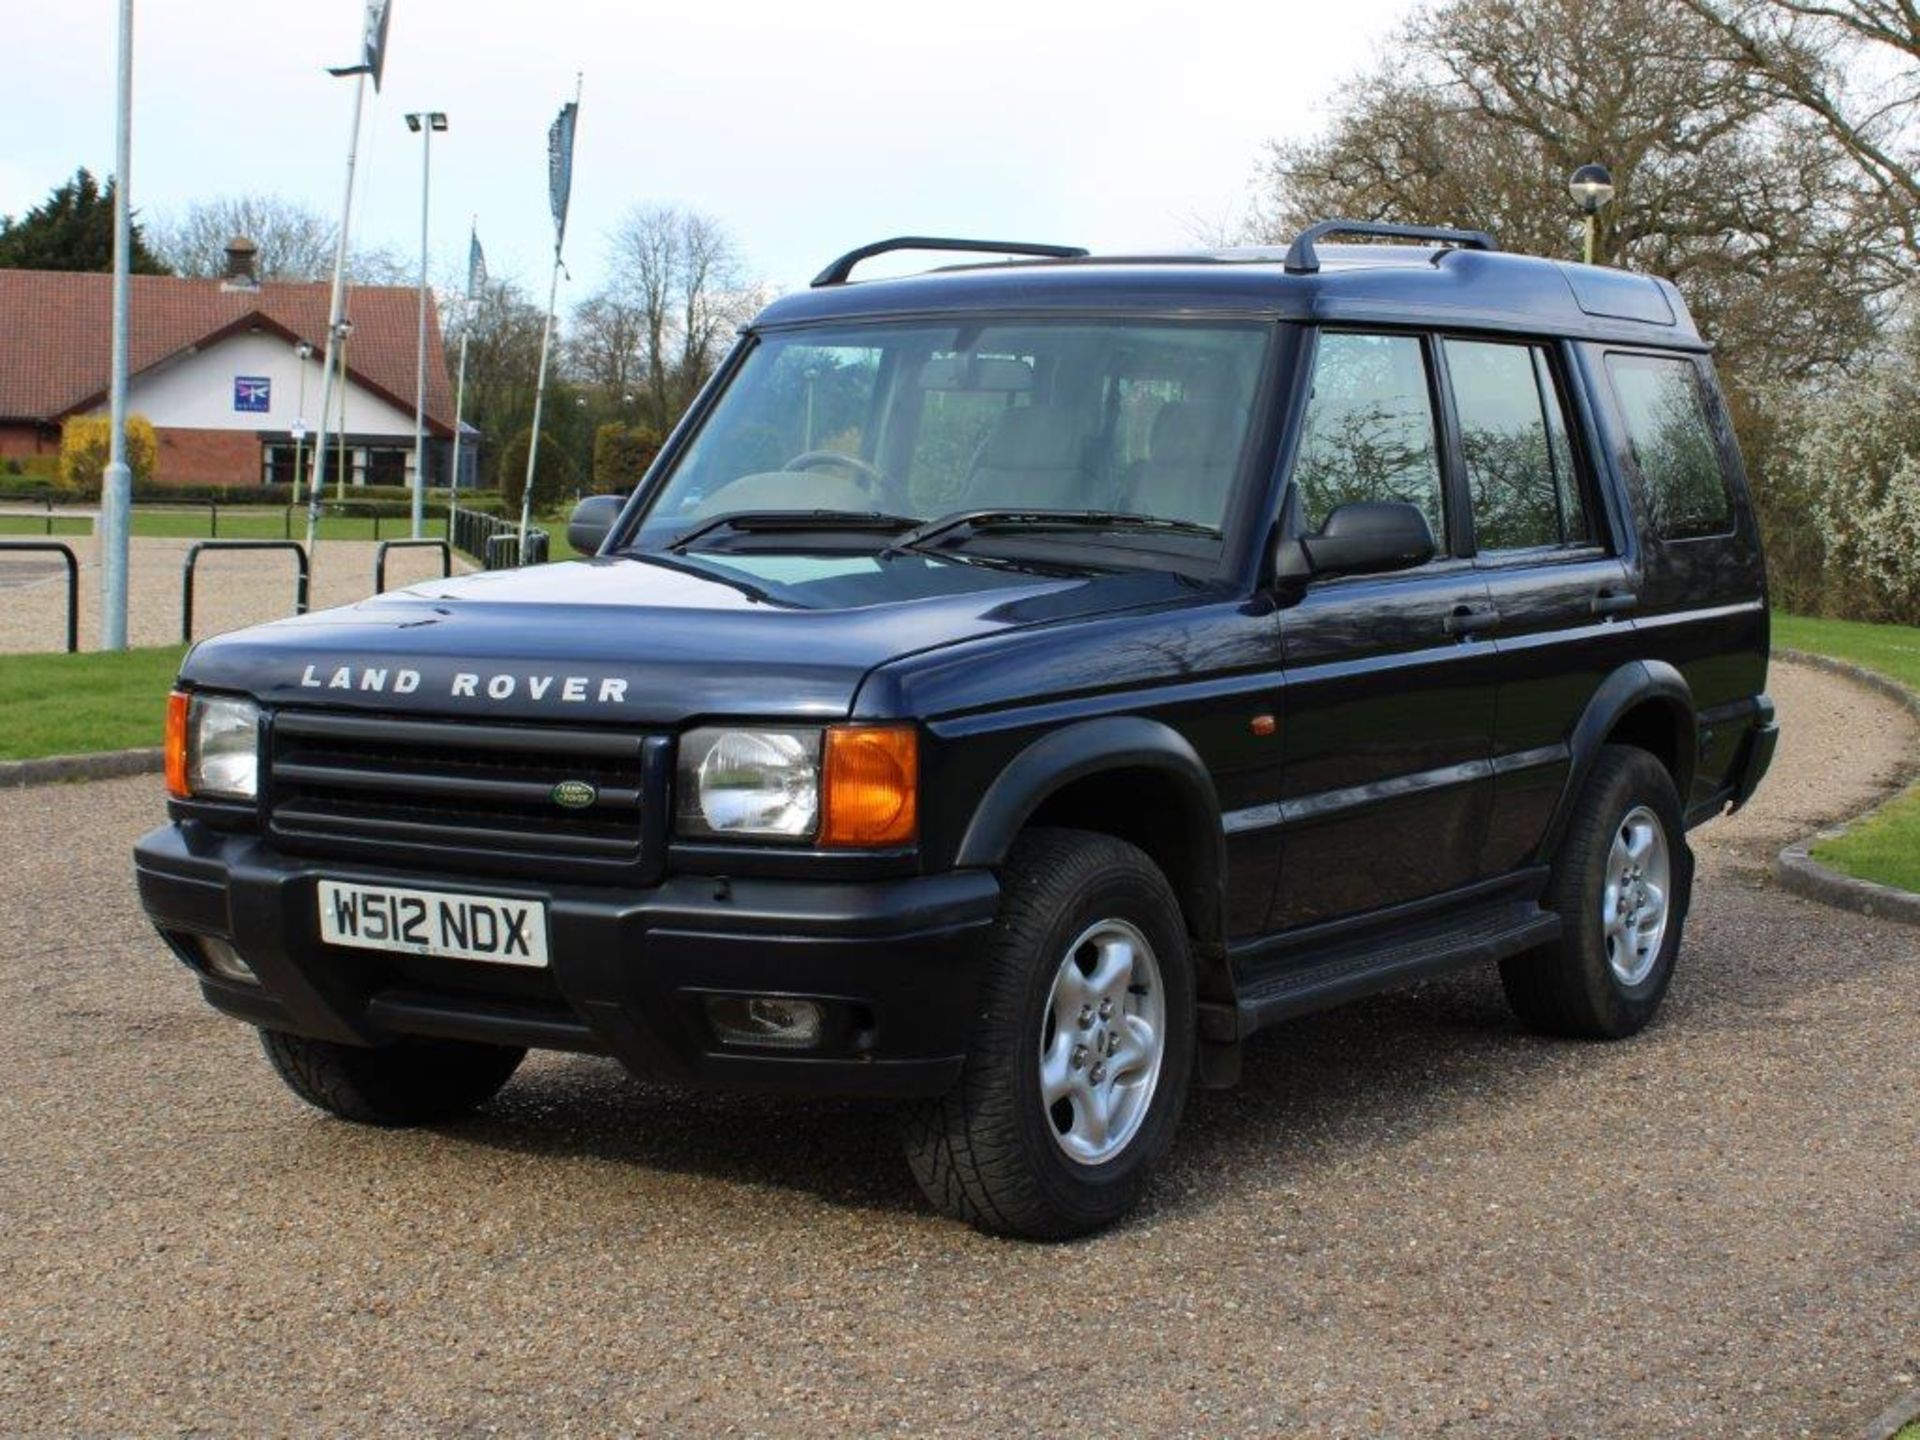 2000 Land Rover Discovery II V8 ES Auto - Image 3 of 14